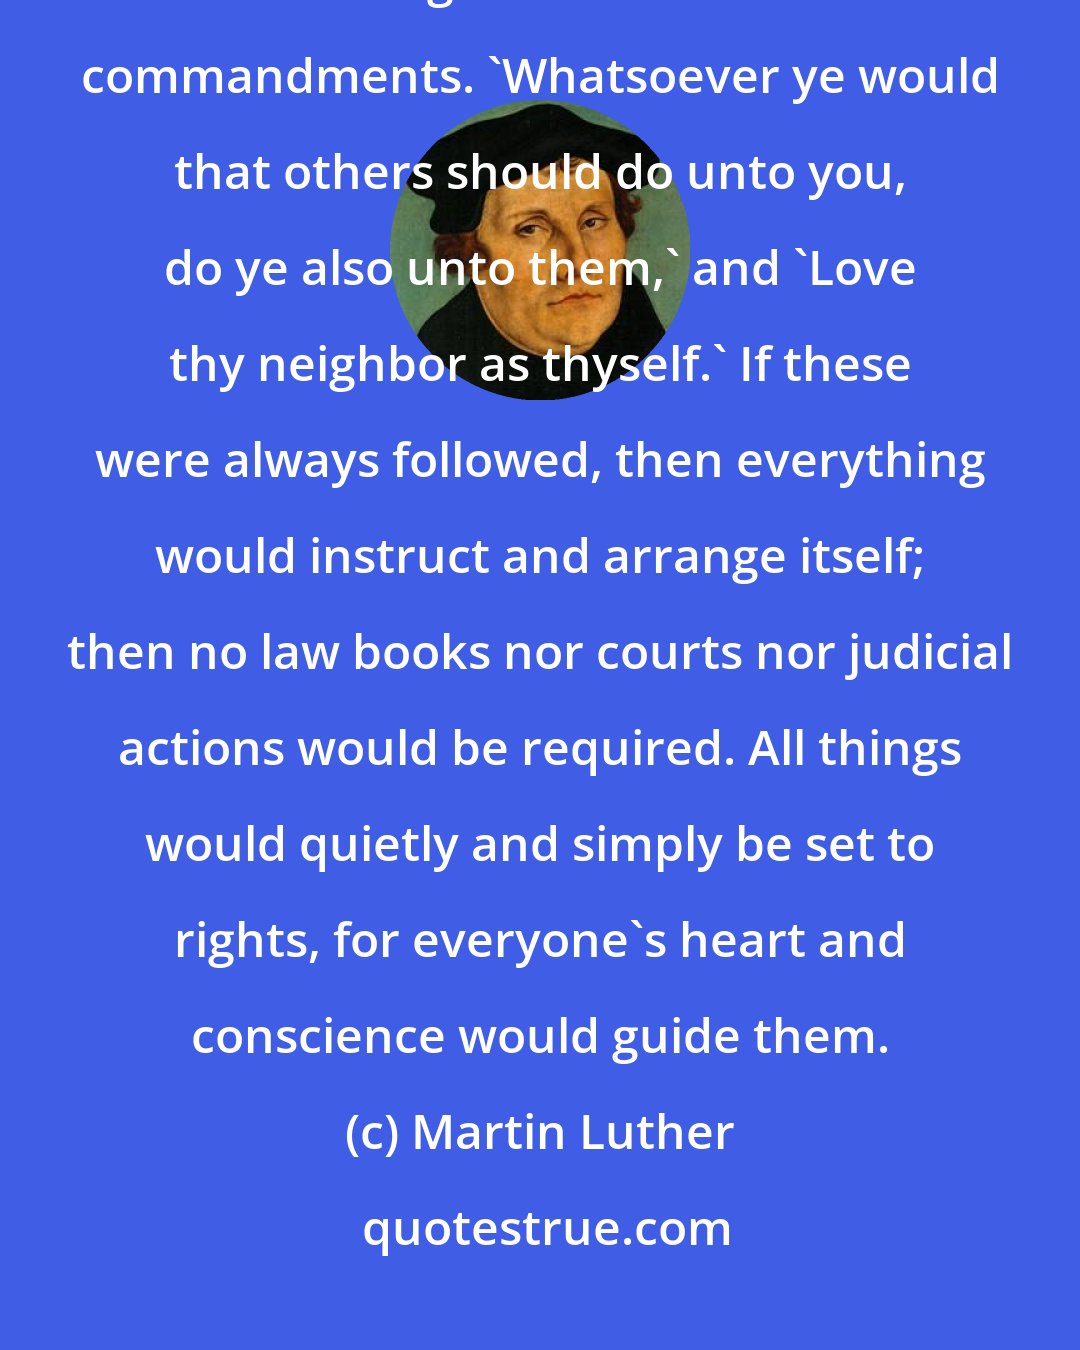 Martin Luther: There can be no be no better instruction... than that every man who is to deal with his neighbor to follow these commandments. 'Whatsoever ye would that others should do unto you, do ye also unto them,' and 'Love thy neighbor as thyself.' If these were always followed, then everything would instruct and arrange itself; then no law books nor courts nor judicial actions would be required. All things would quietly and simply be set to rights, for everyone's heart and conscience would guide them.